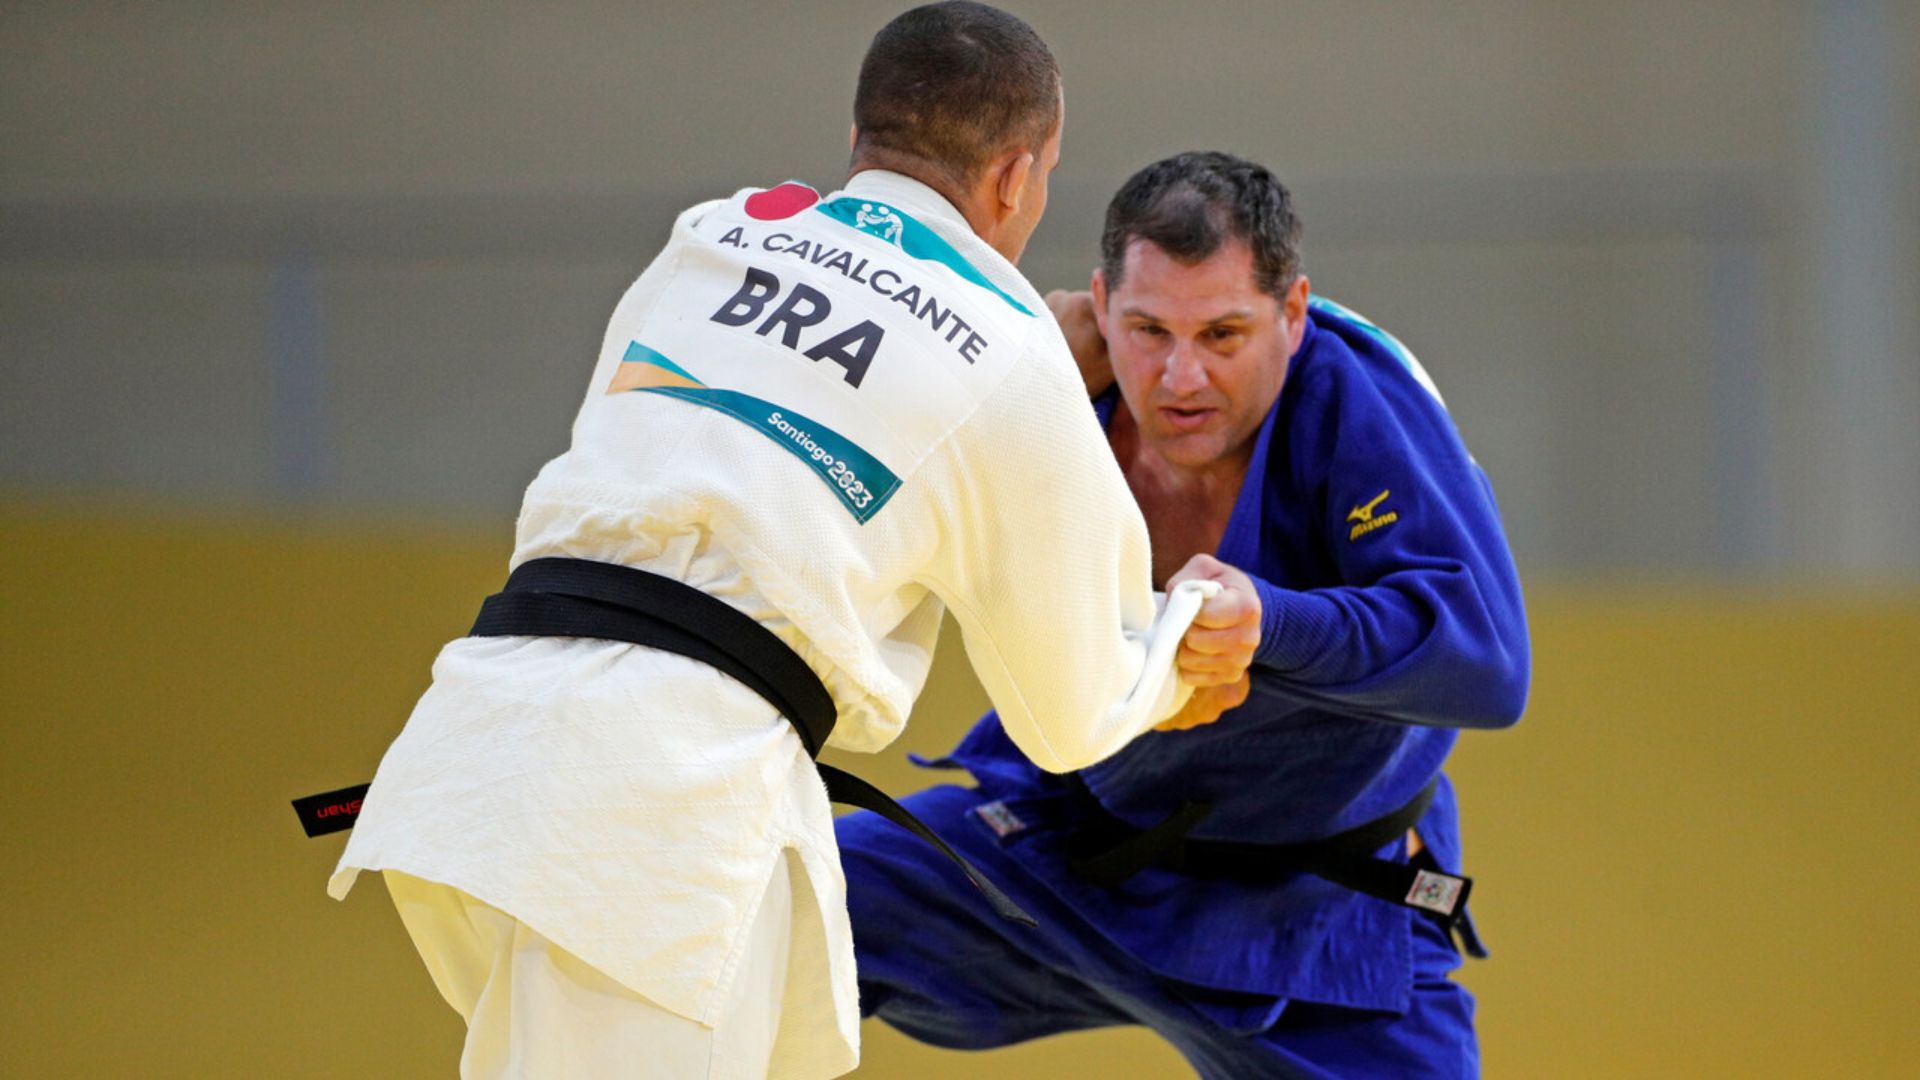 Brazil Dominated in Judo and Chile Will Compete for Two Bronze Medals